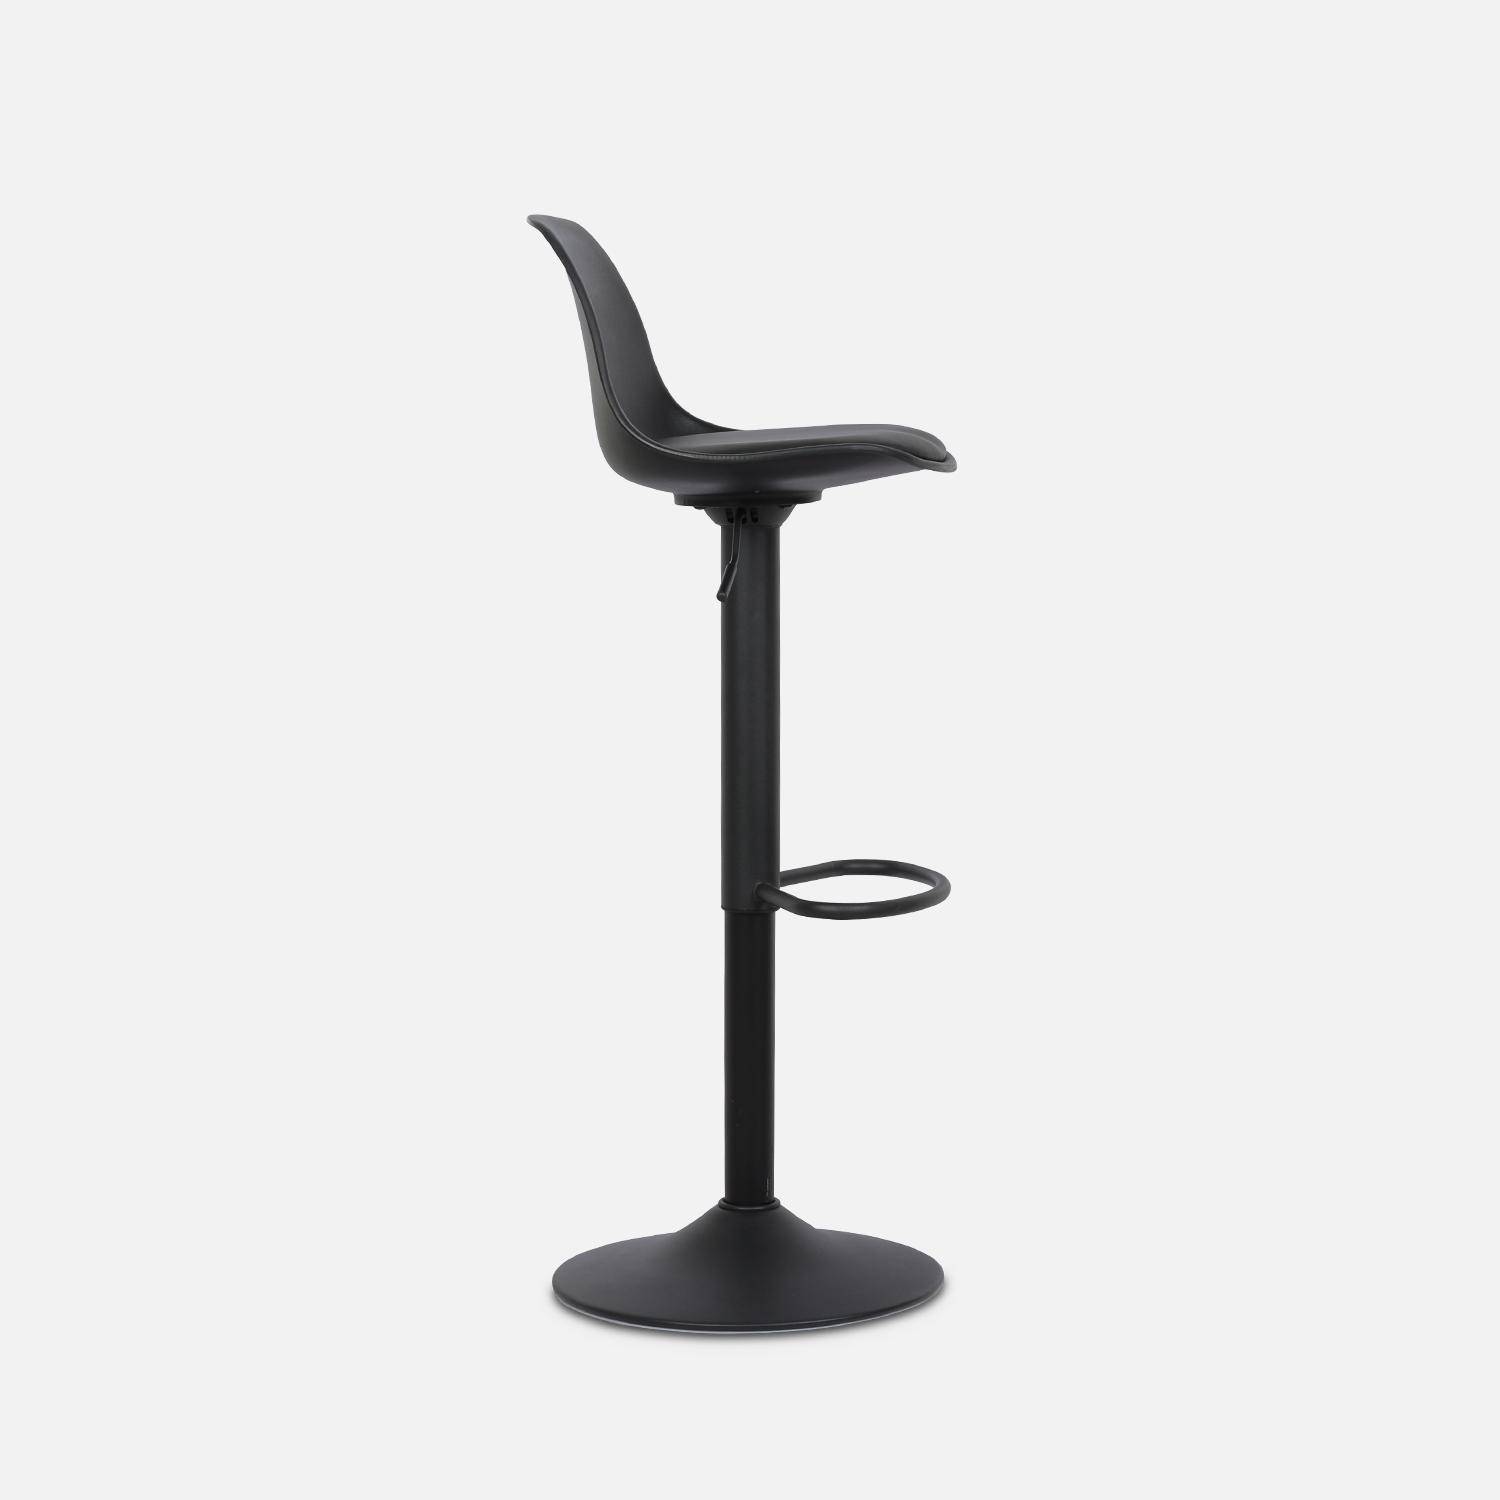 Pair of faux leather, rounded backrest, adjustable bar stools, seat height 61.5 - 83.5cm - Noah - Black Photo6